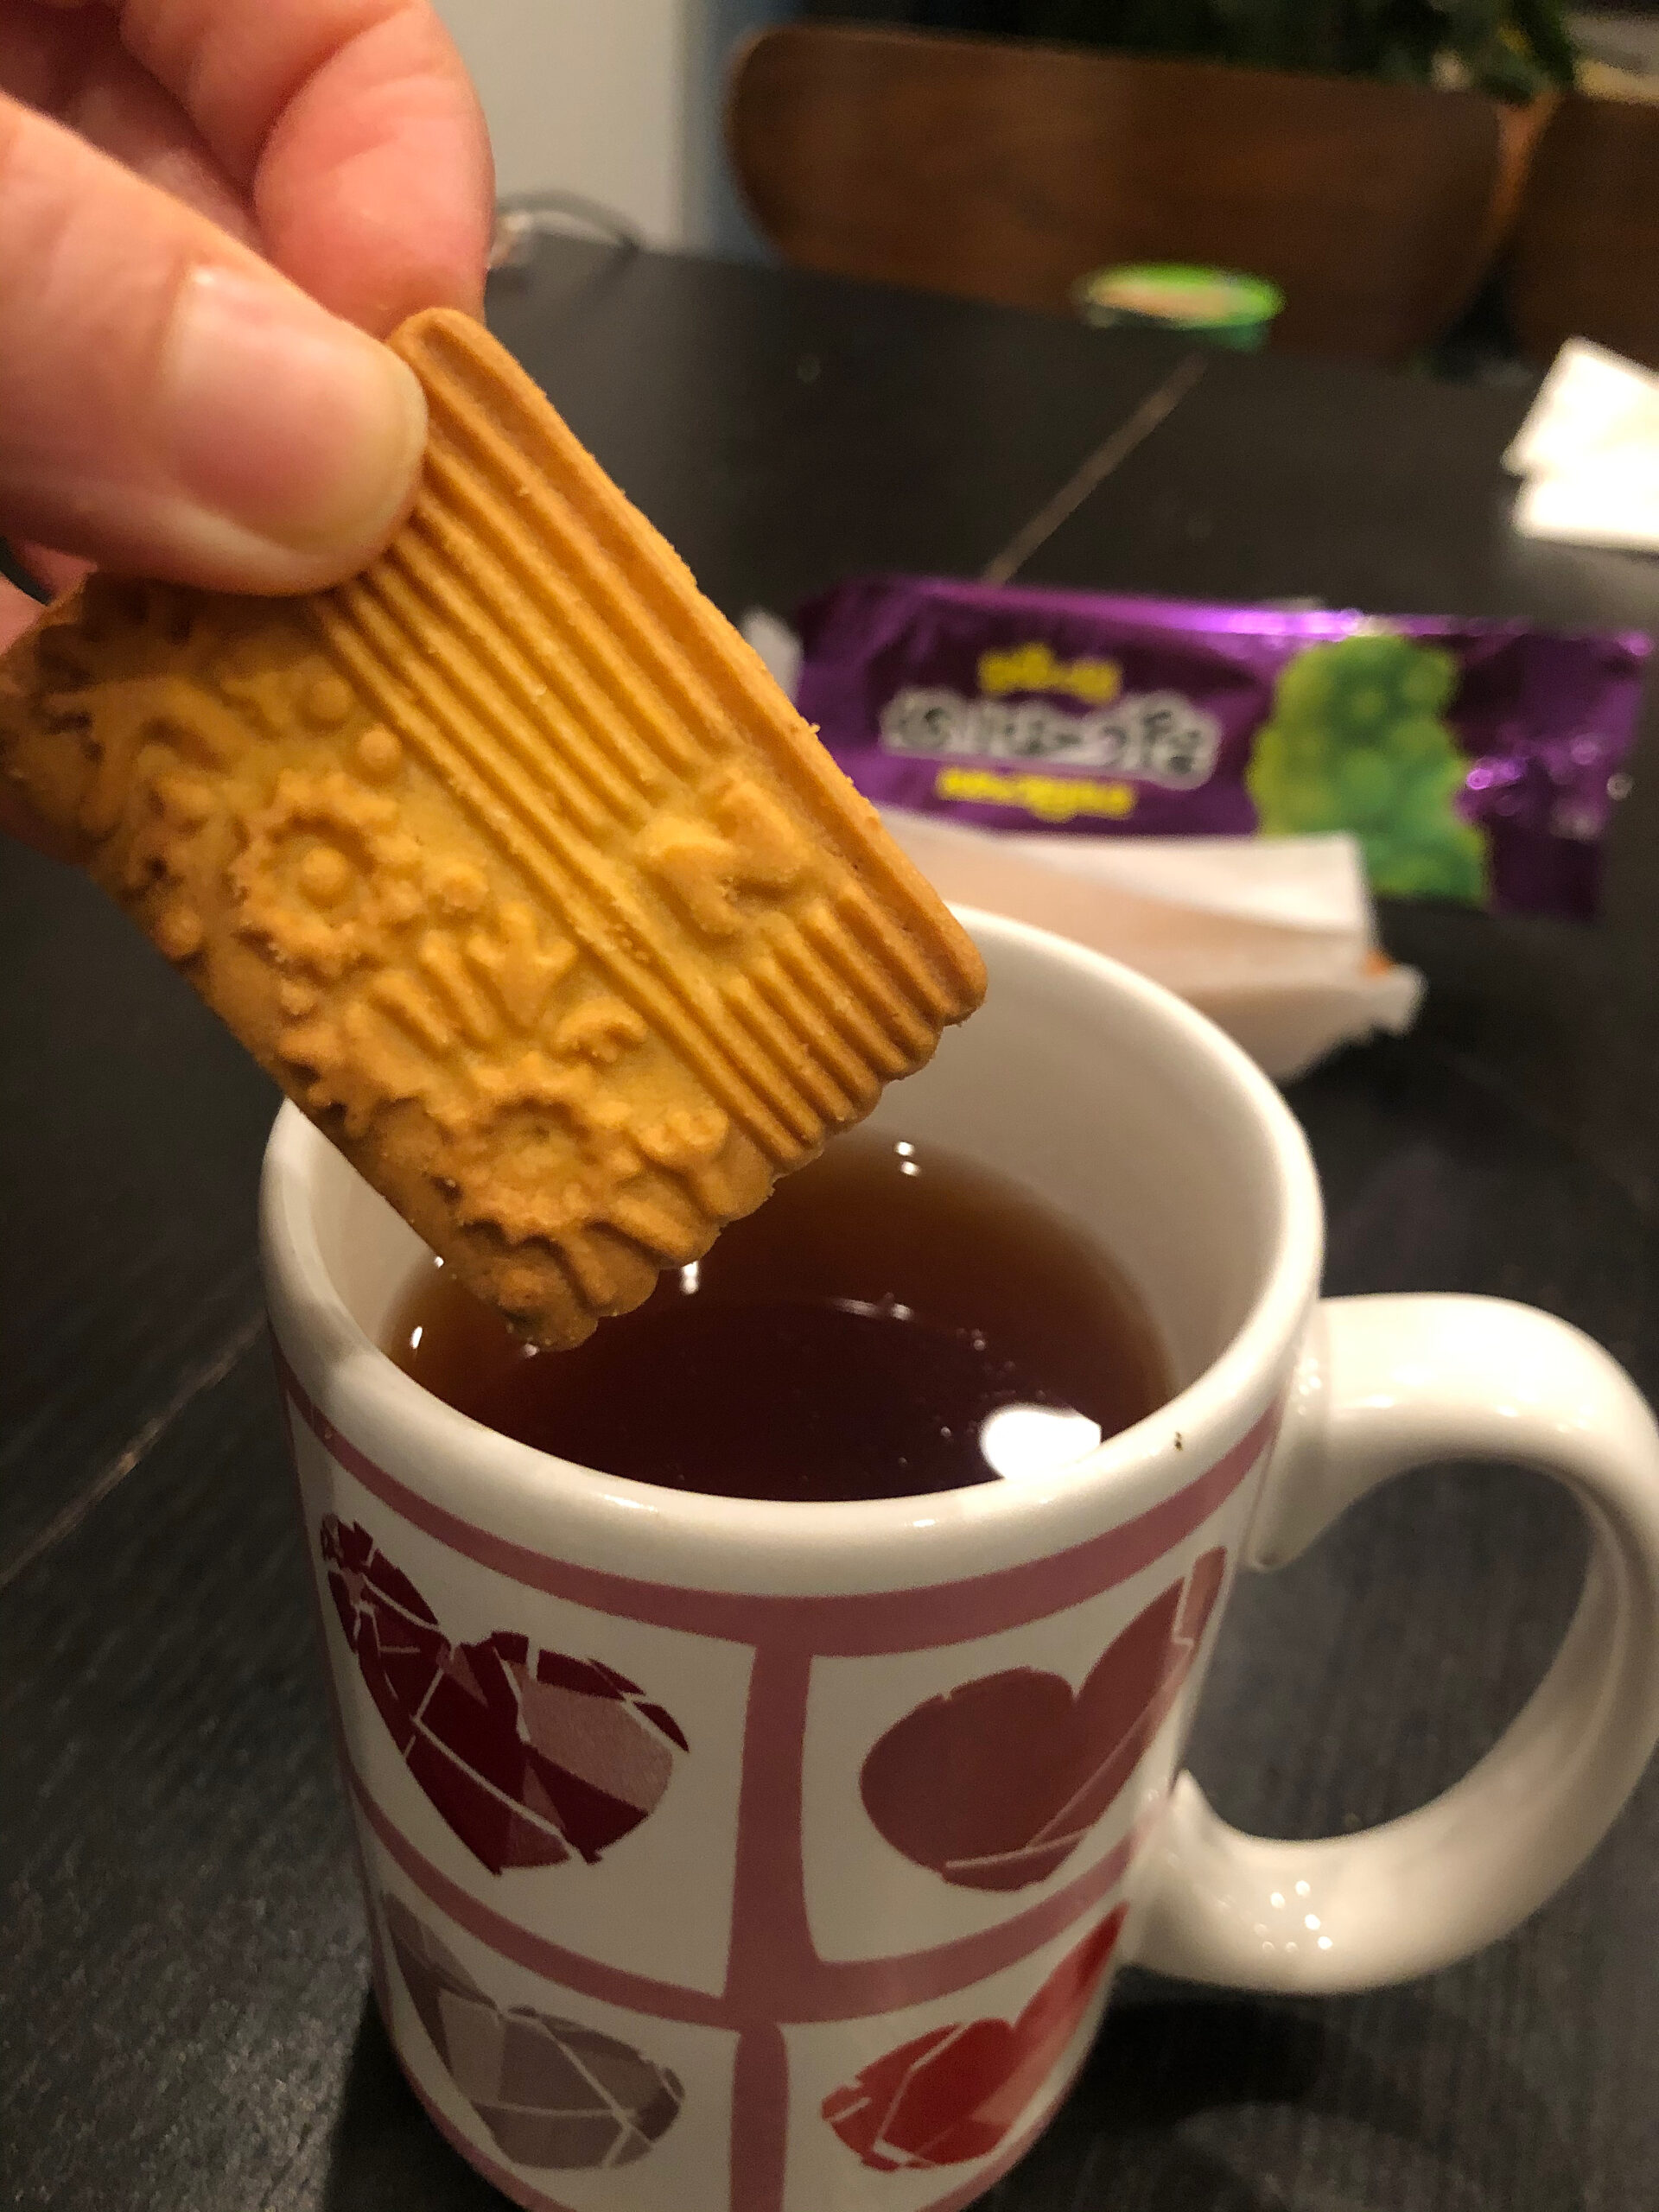 Nabisco Glucose Biscuit being dipping into a cup of tea.